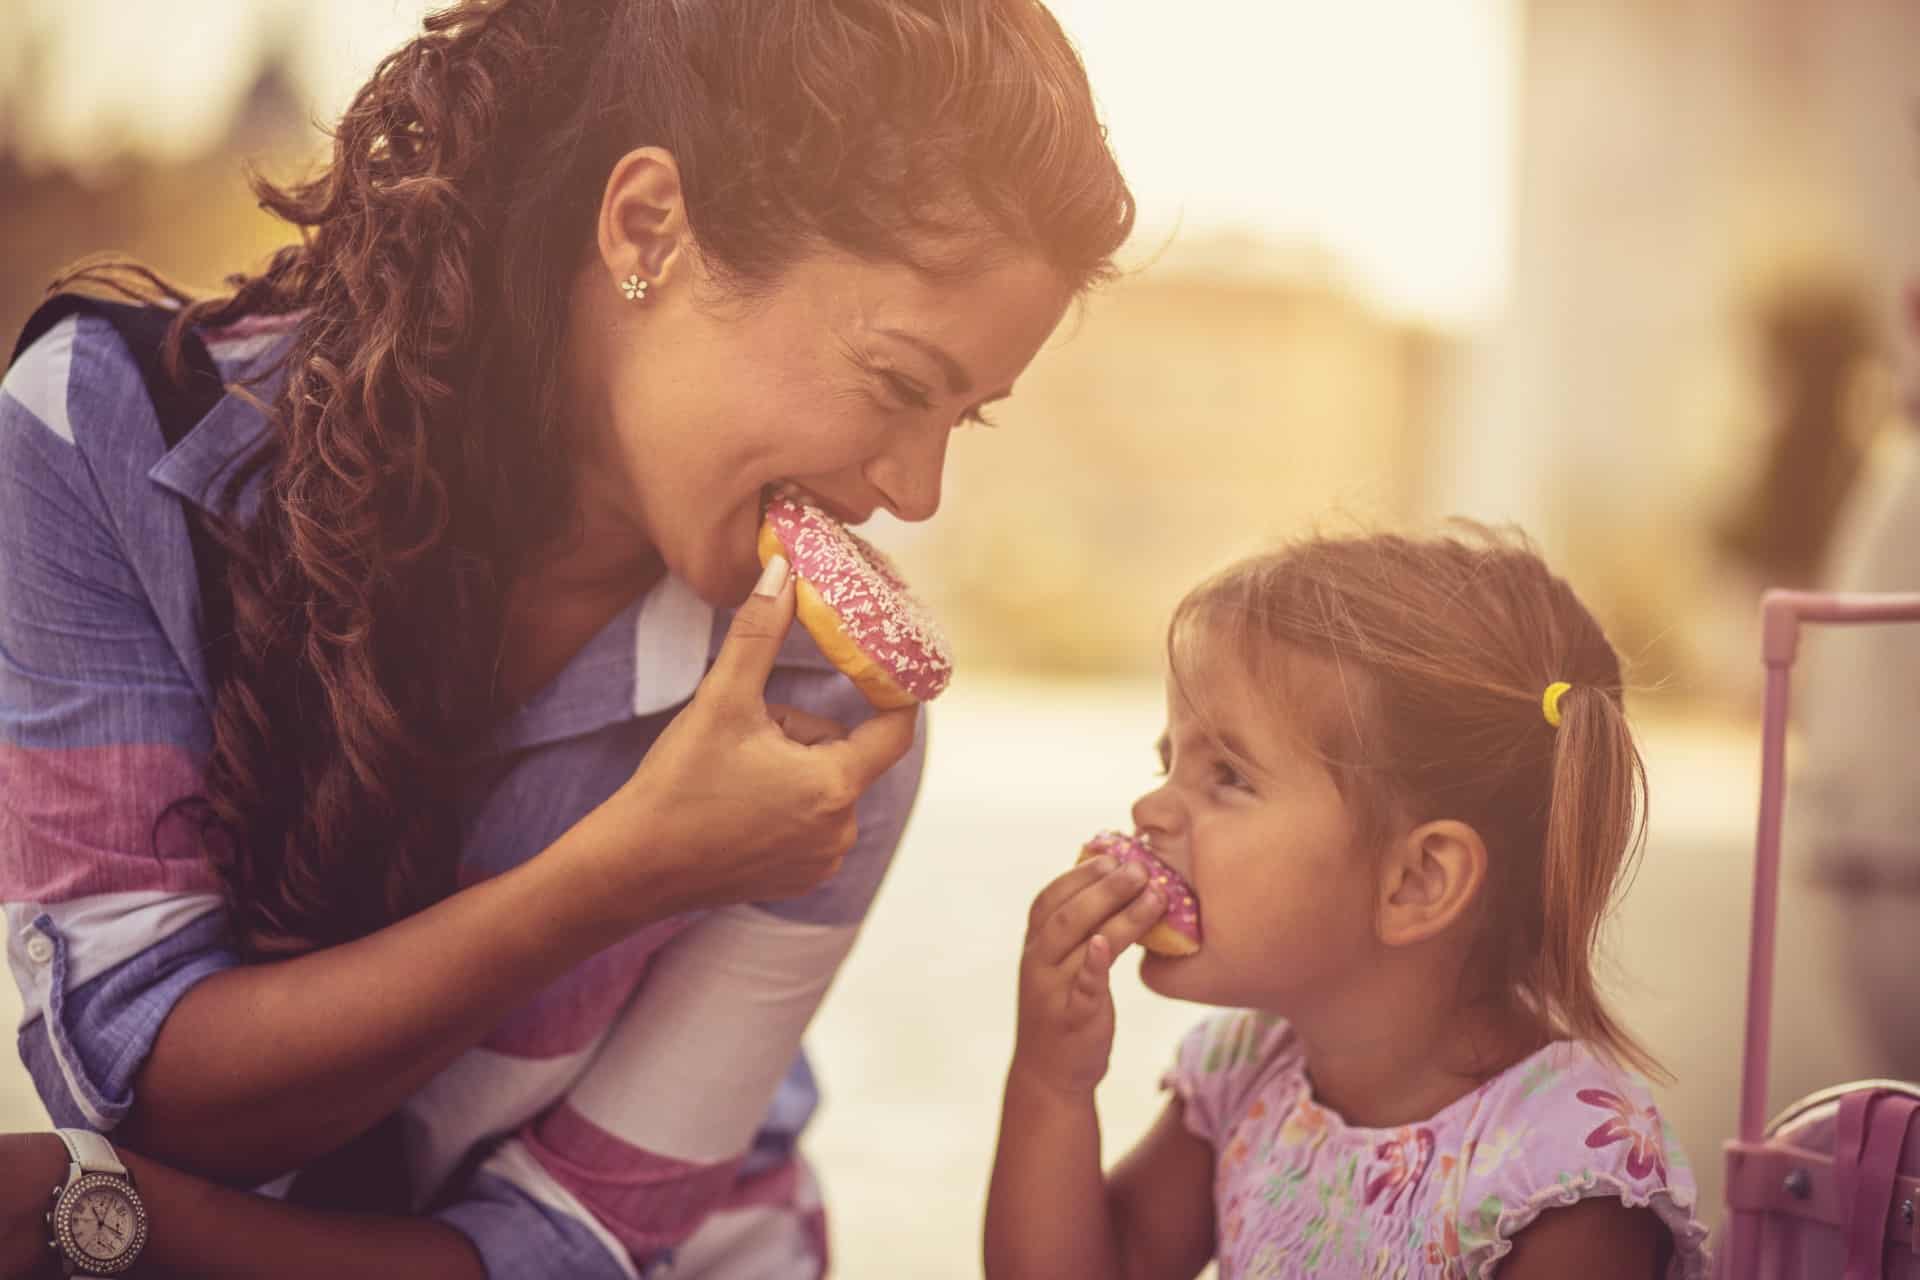 This is a photo of a mom and her daughter eating doughnuts.